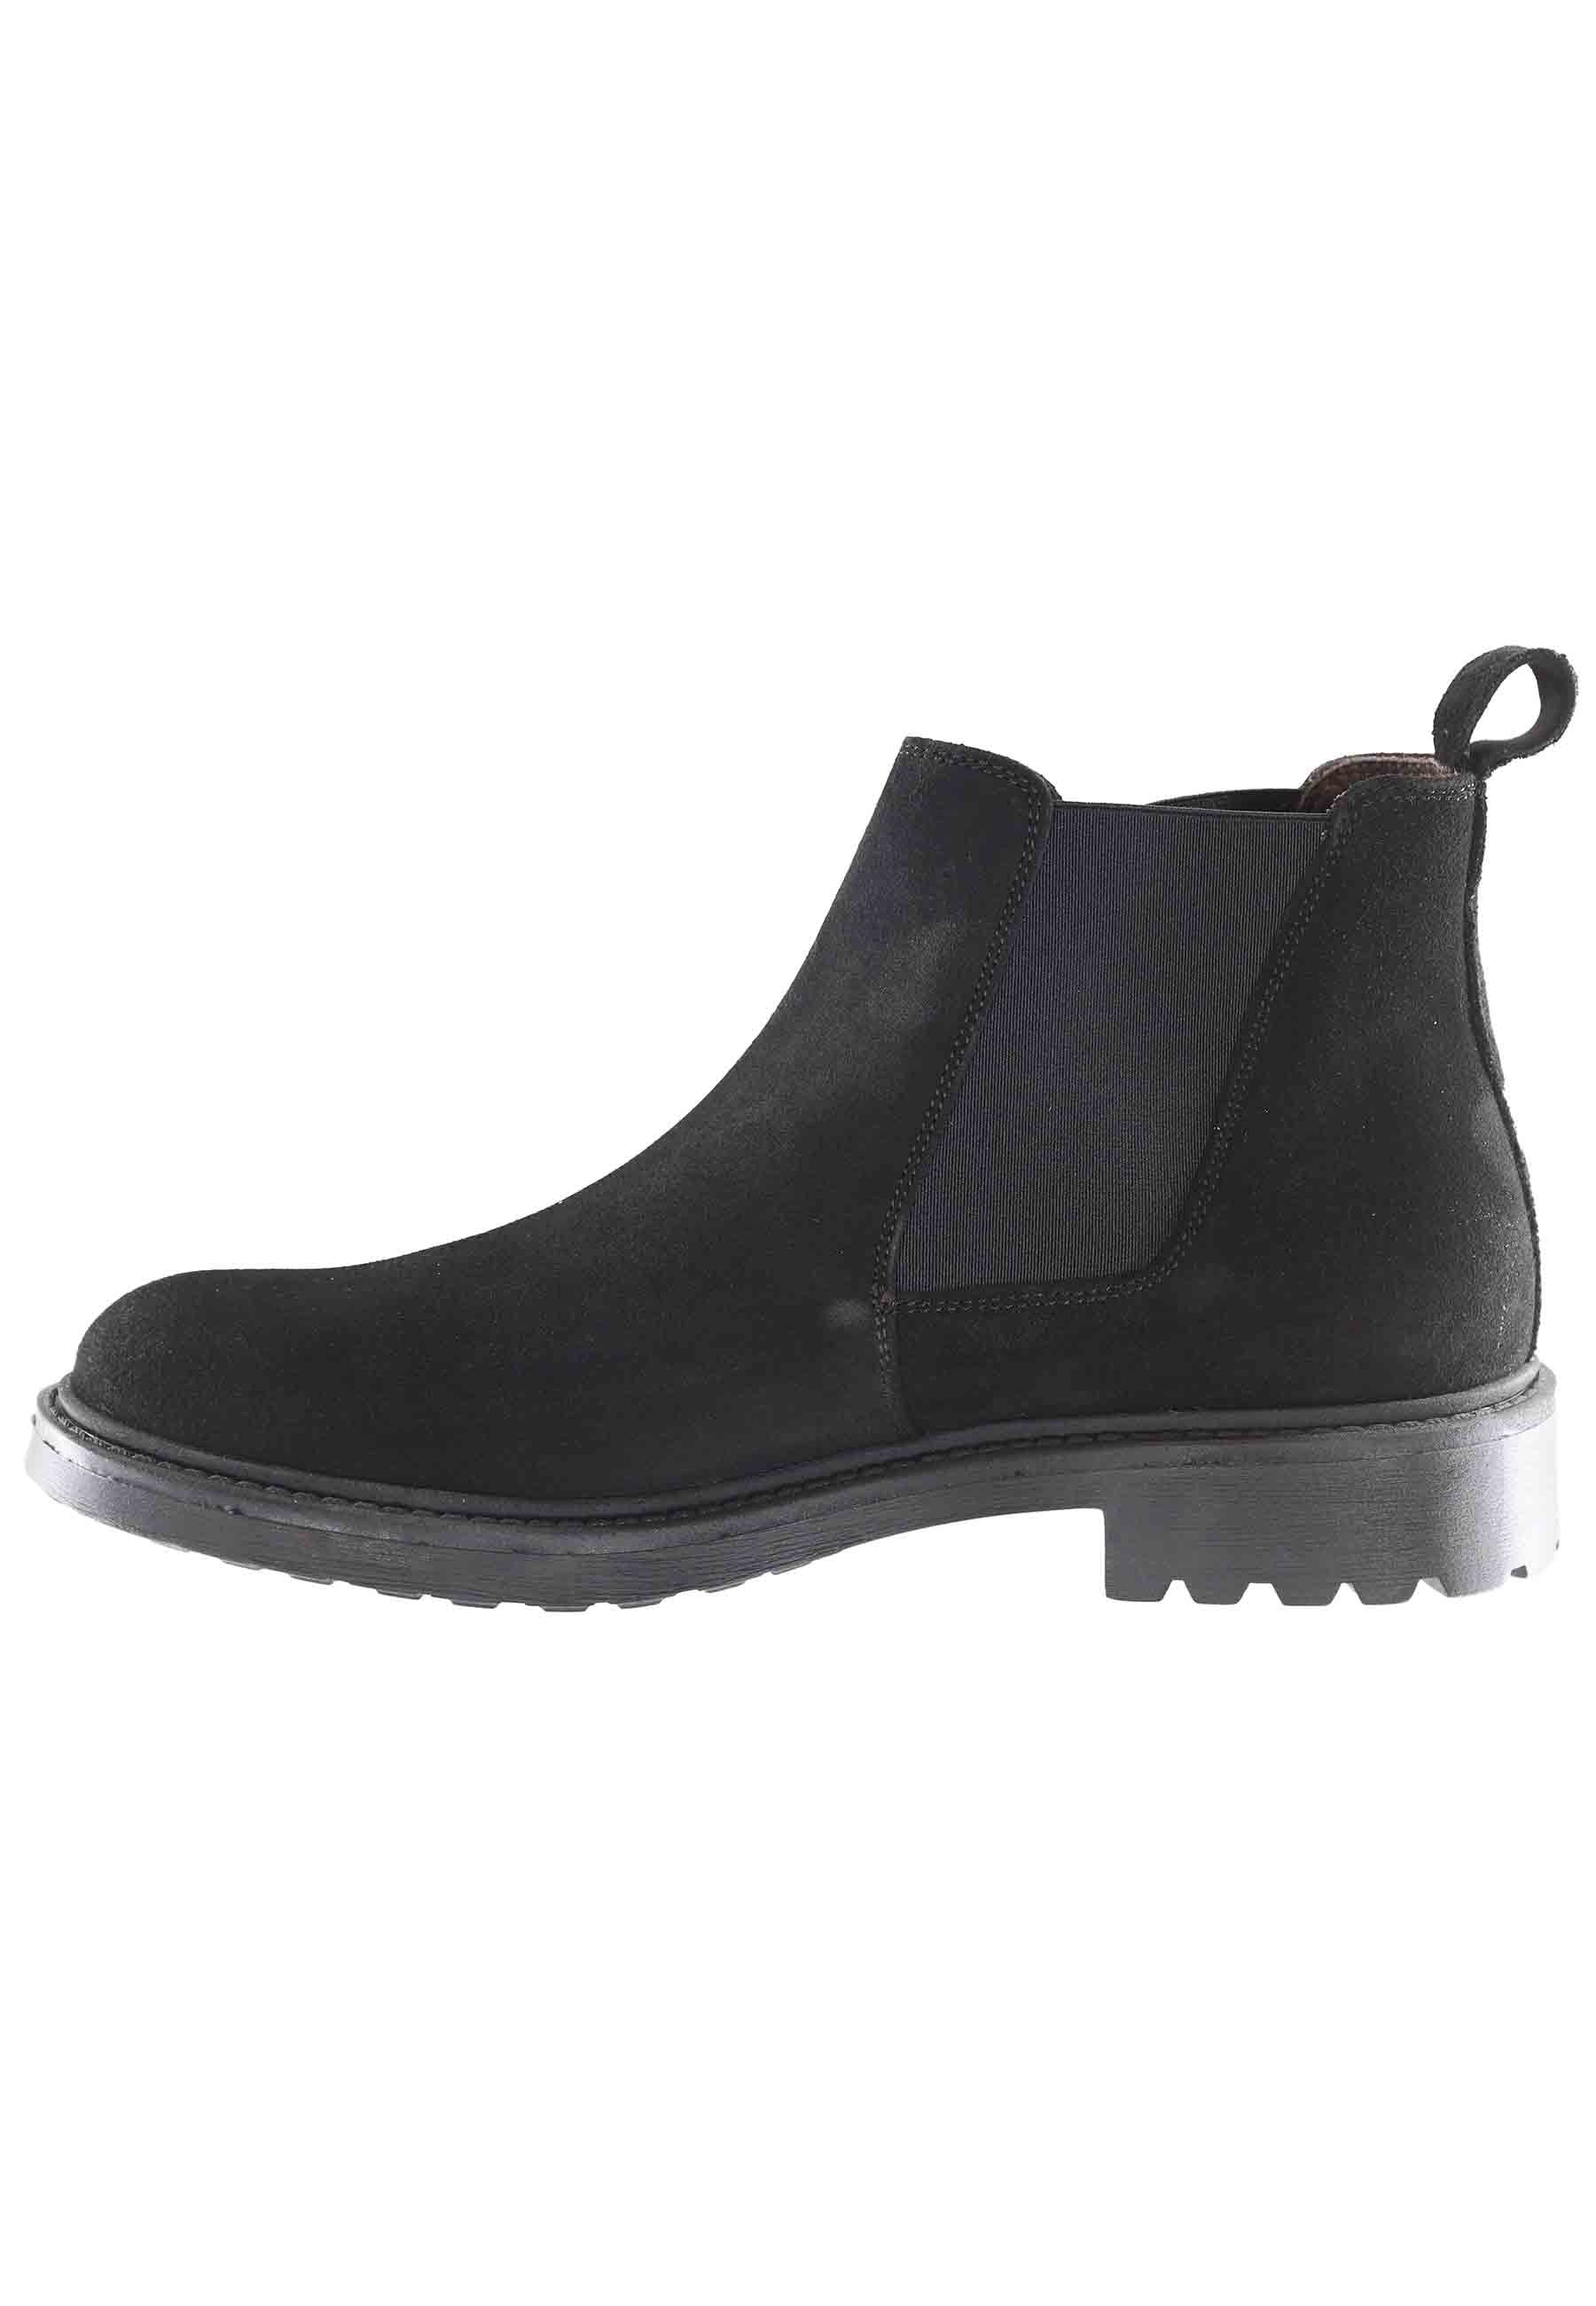 Men's Chelsea boot in black camouflage with lug sole